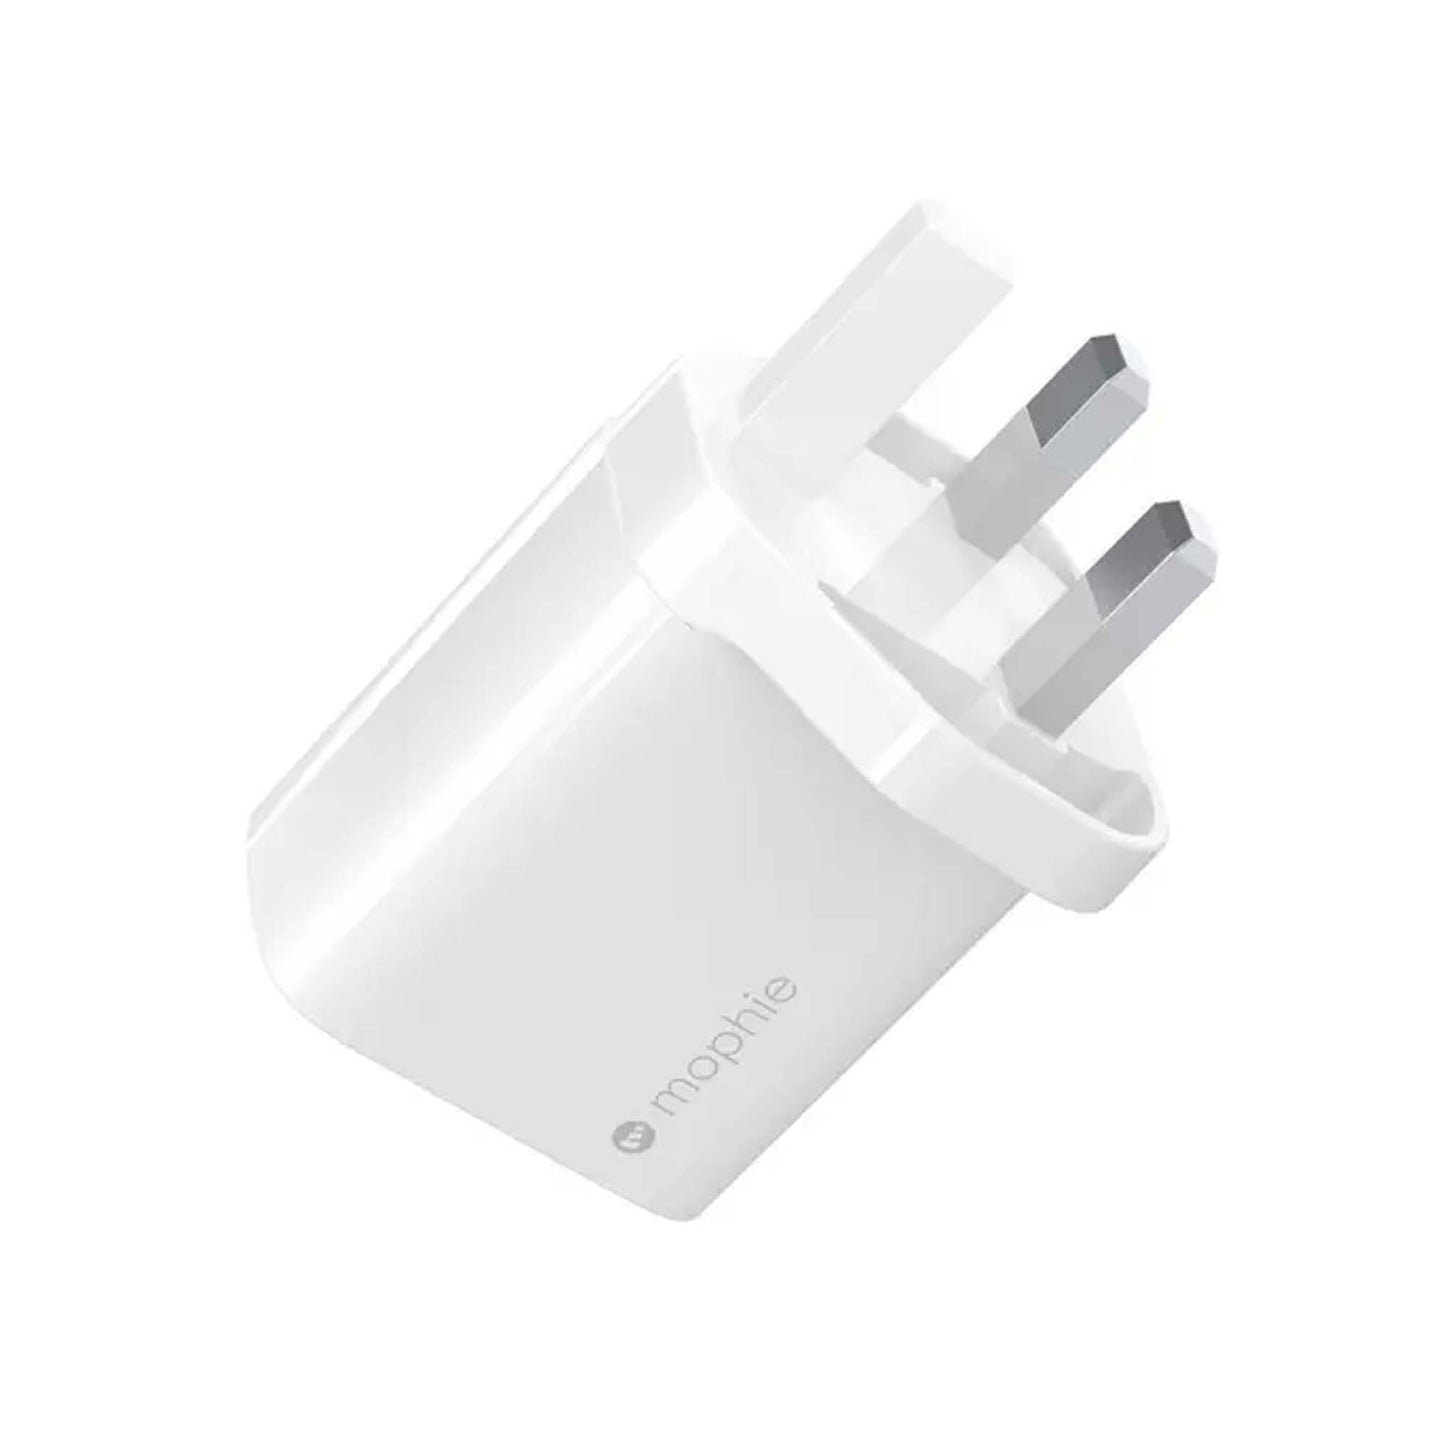 Mophie Wall Adapter USB-C 30W GaN - High speed USB-C PD GaN 30W Fast Charge - White (Barcode: 840056151543 )